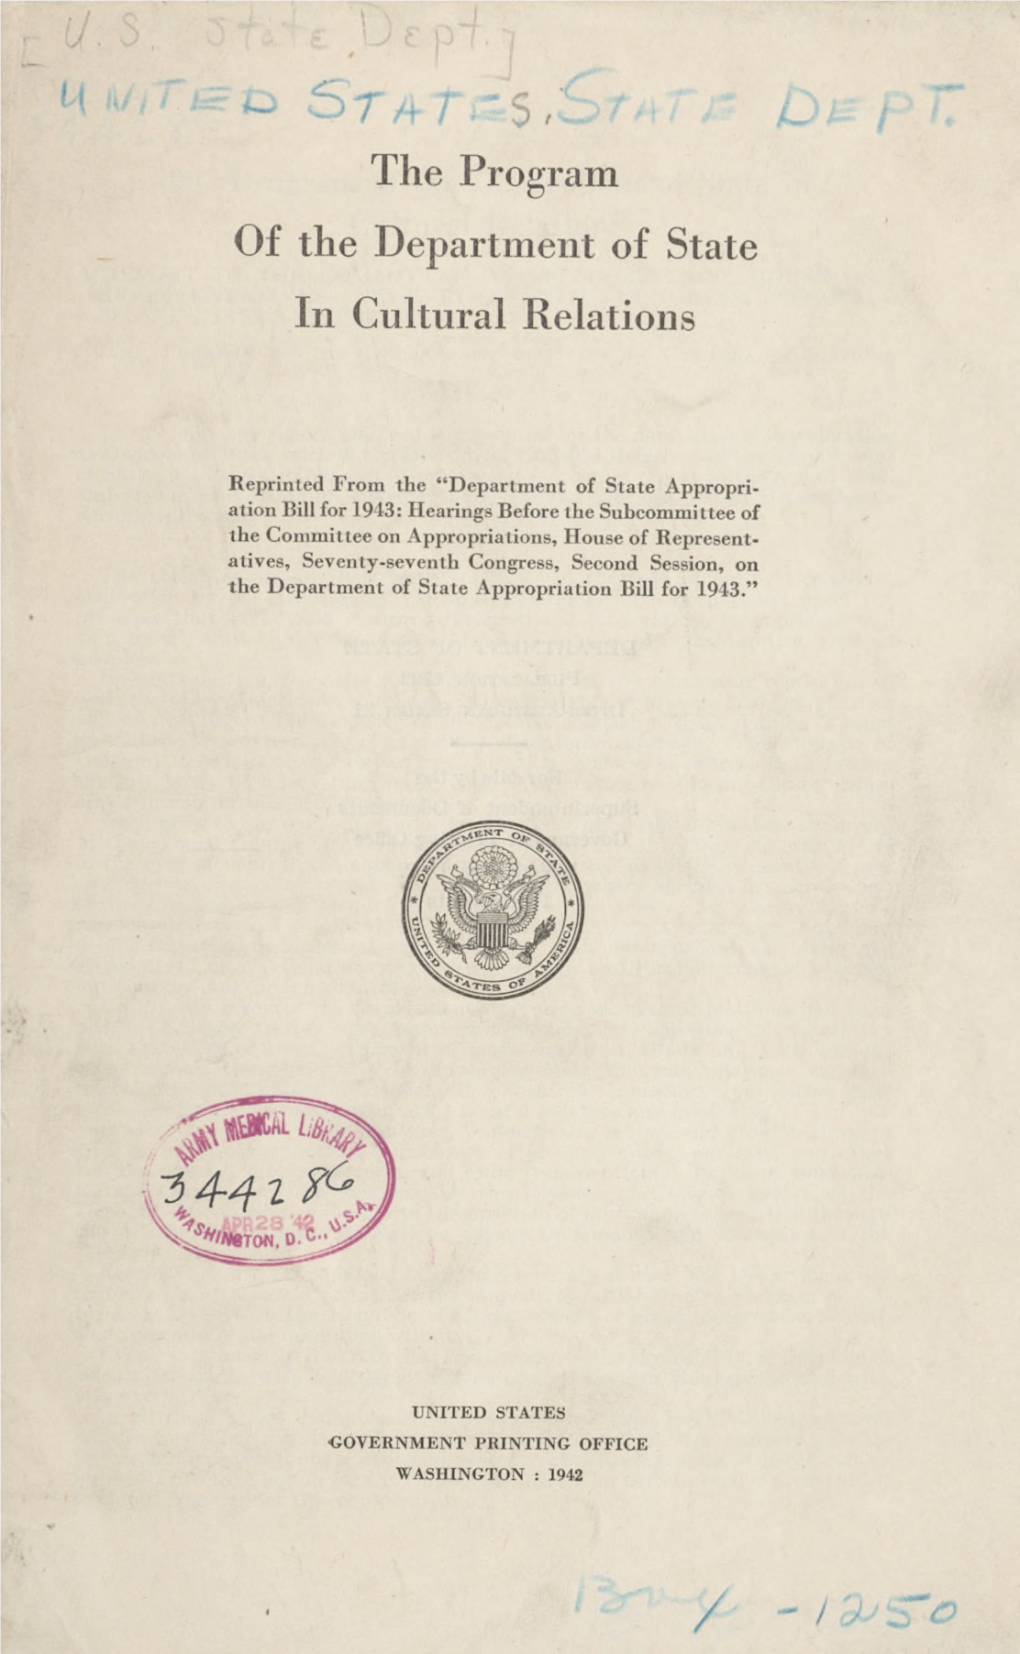 The Program of the Department of State in Cultural Relations